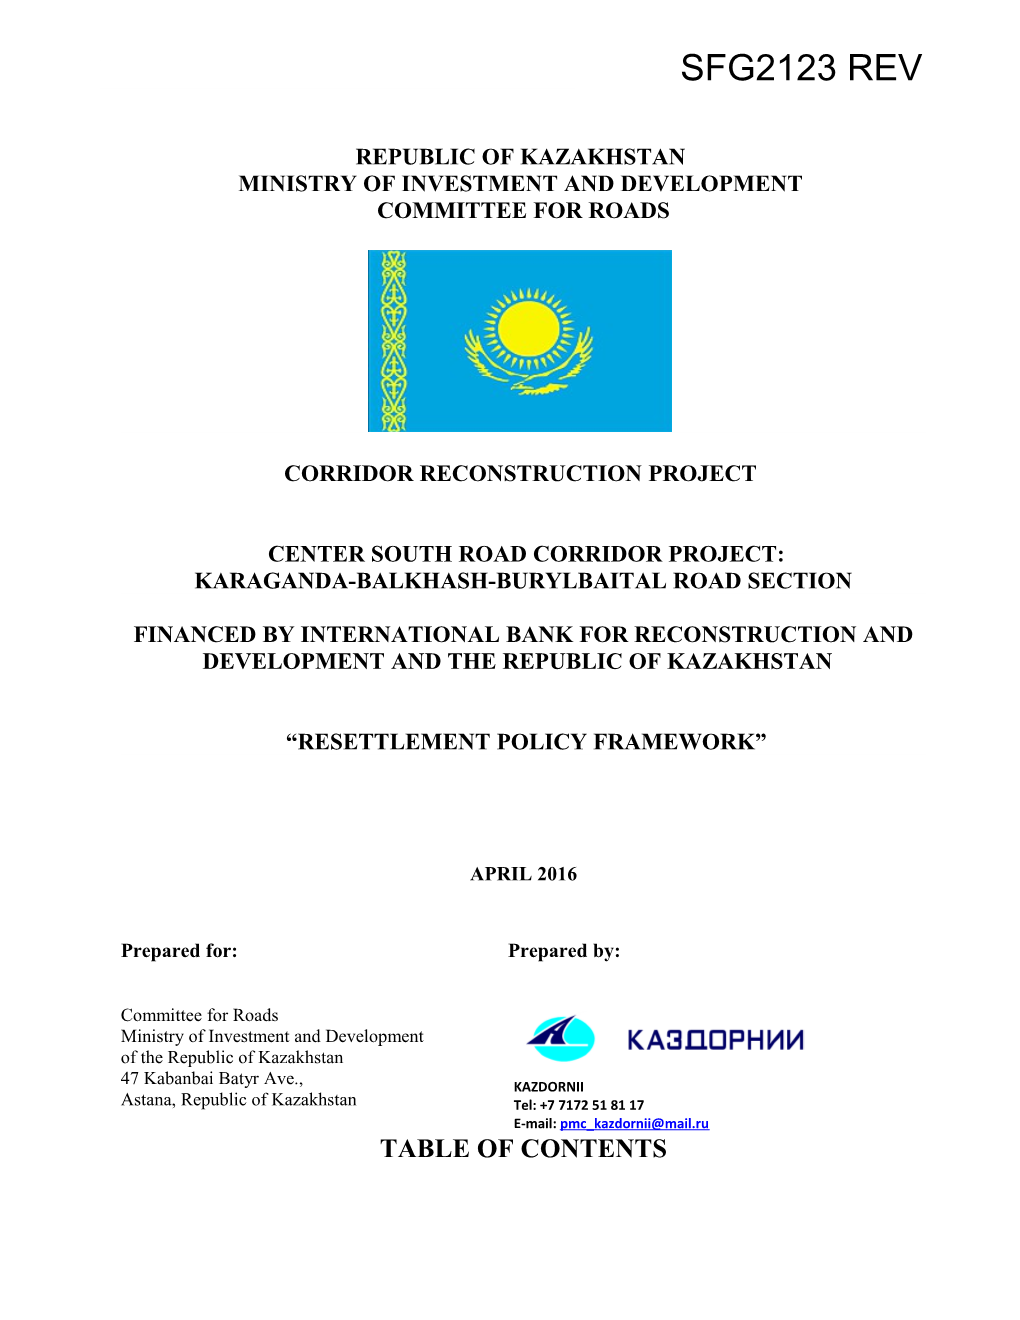 East West Highway Project: Resettlement Implementation Report